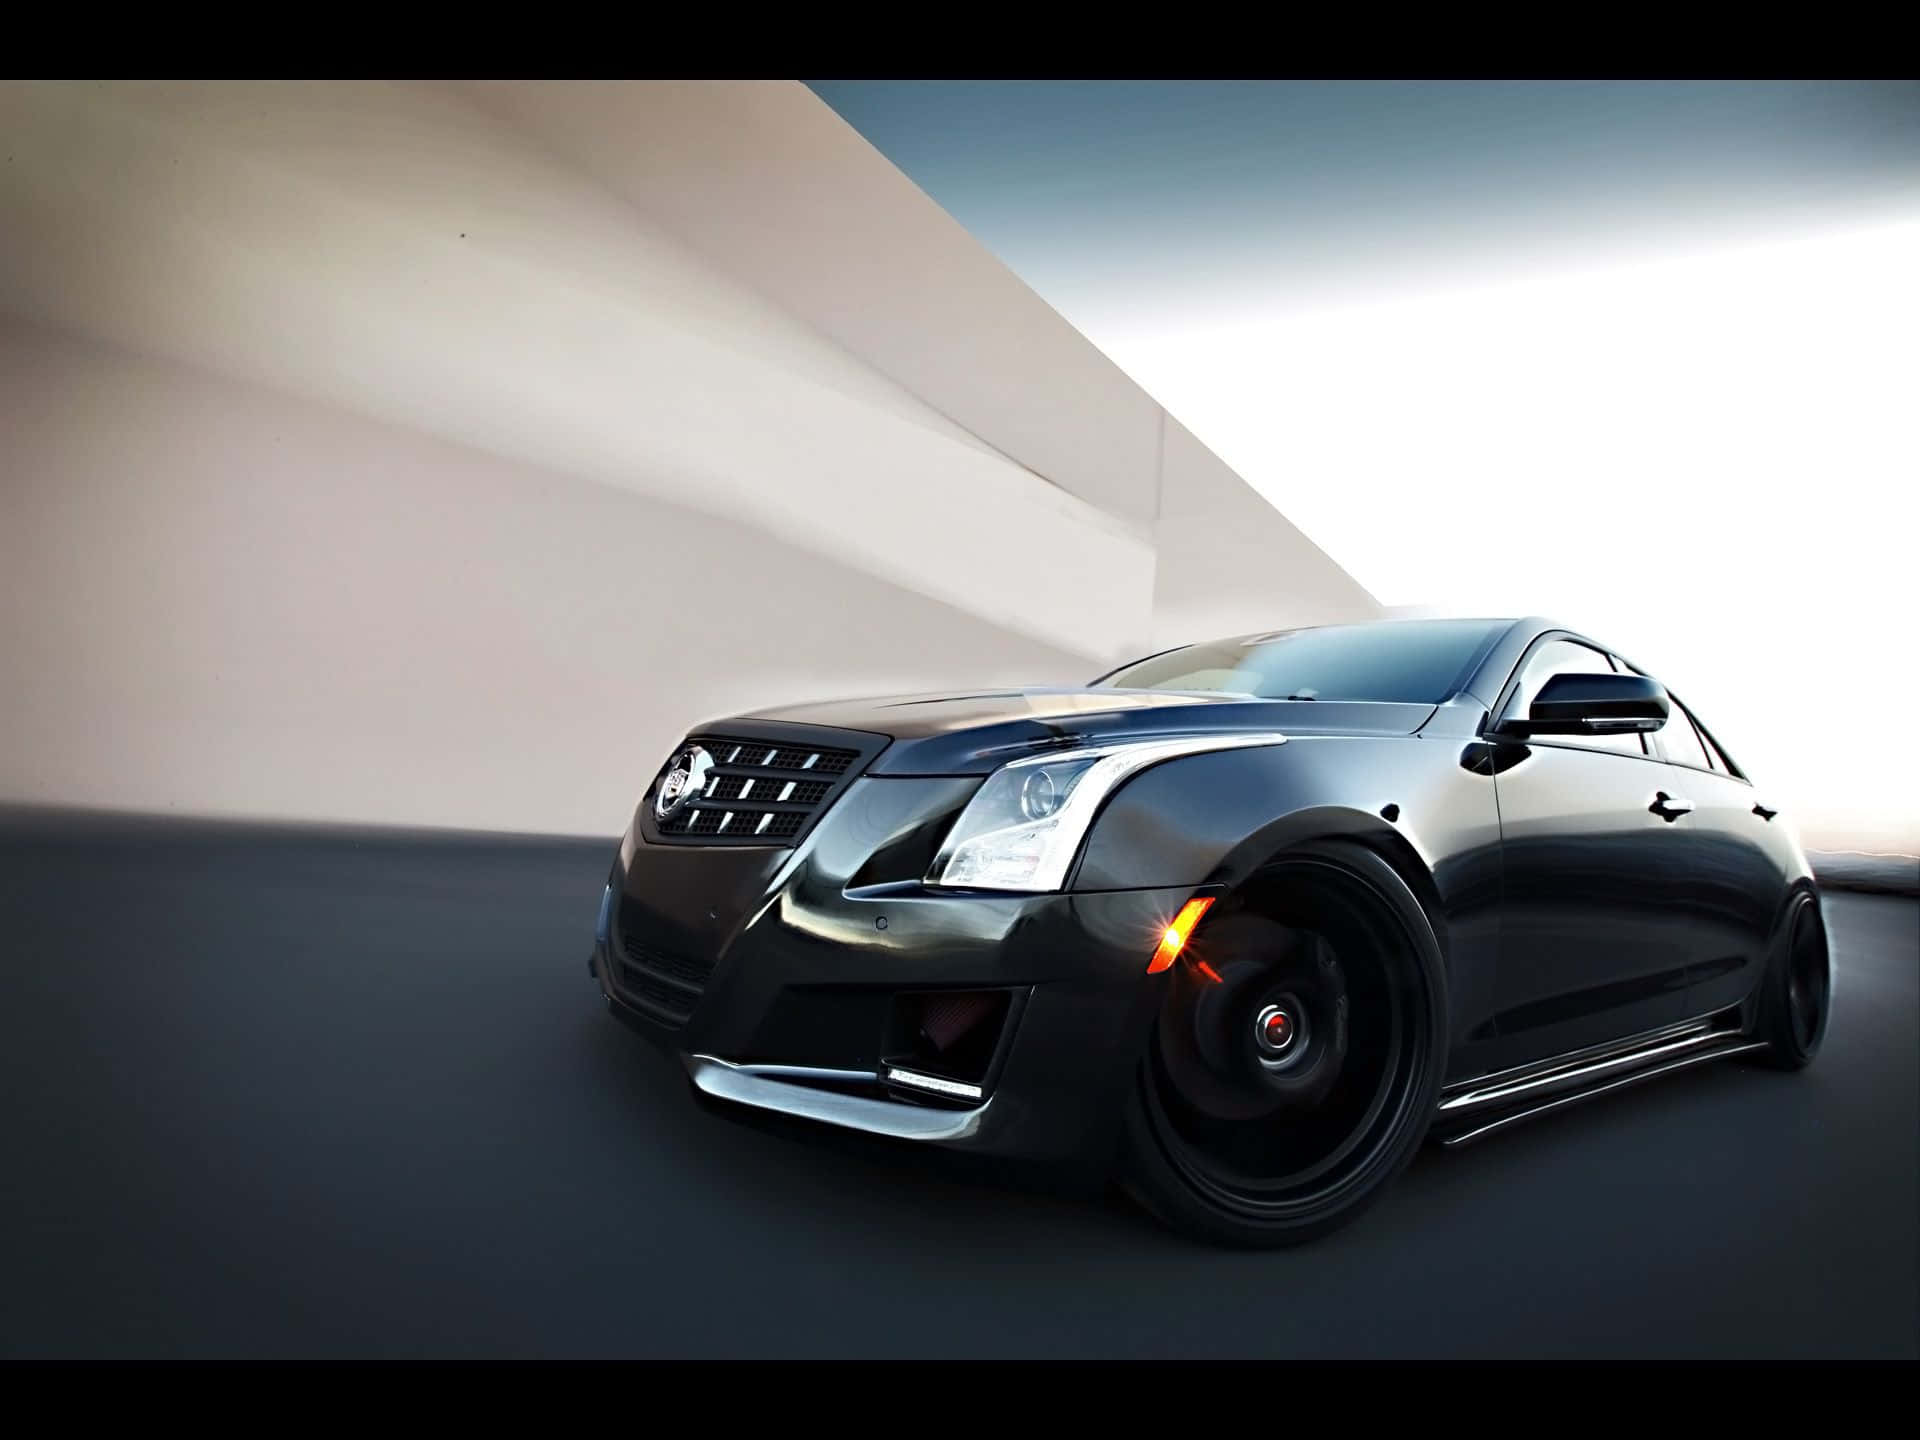 Sleek and Luxurious Cadillac ATS in motion Wallpaper